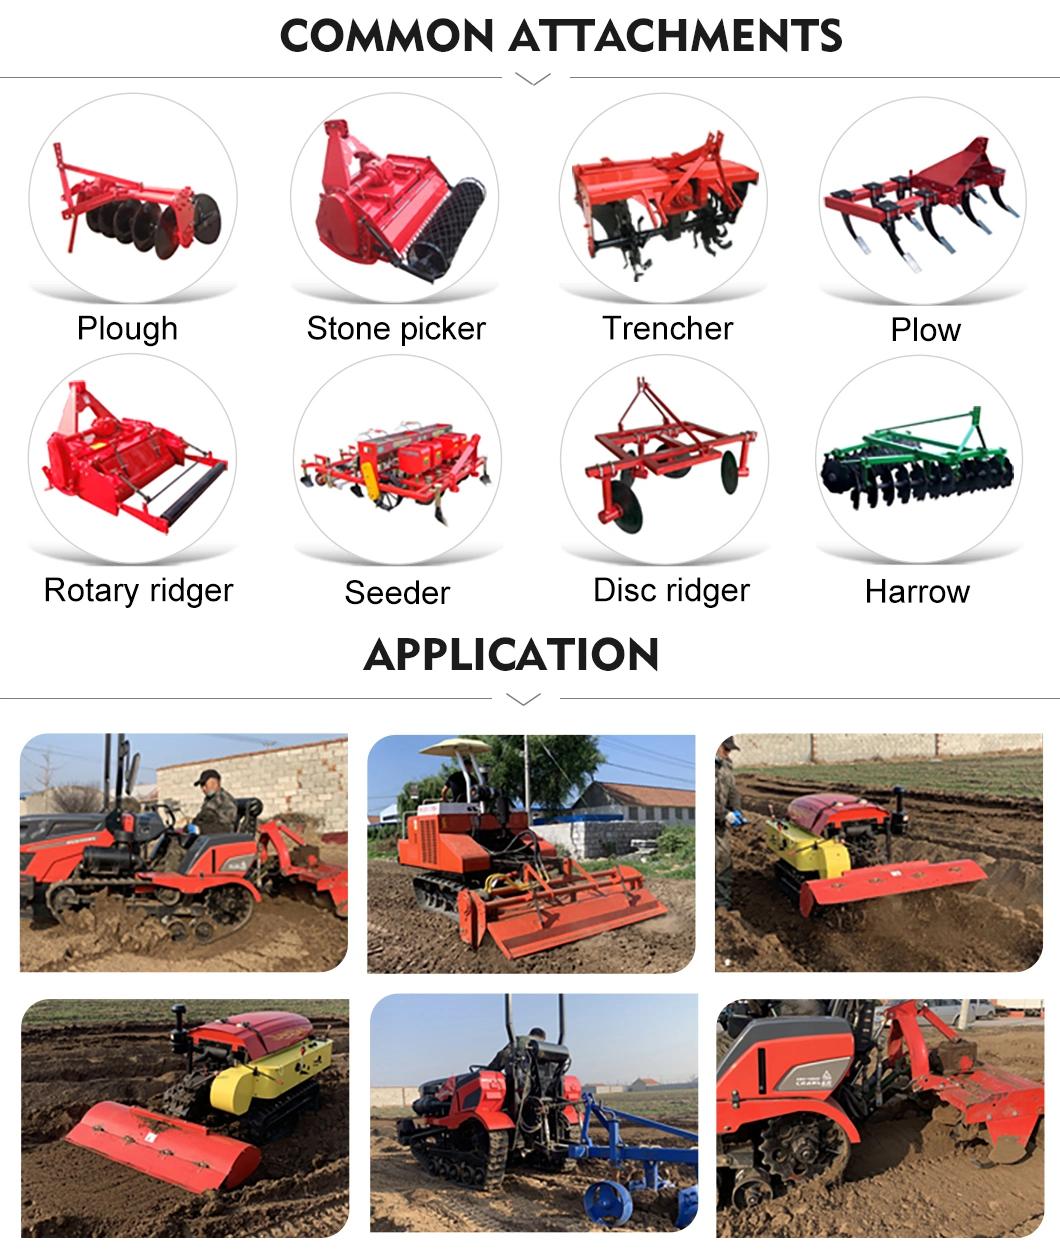 environment Friendly Compact Tractor Tracks Power Track Tractor Tracked Cultivators